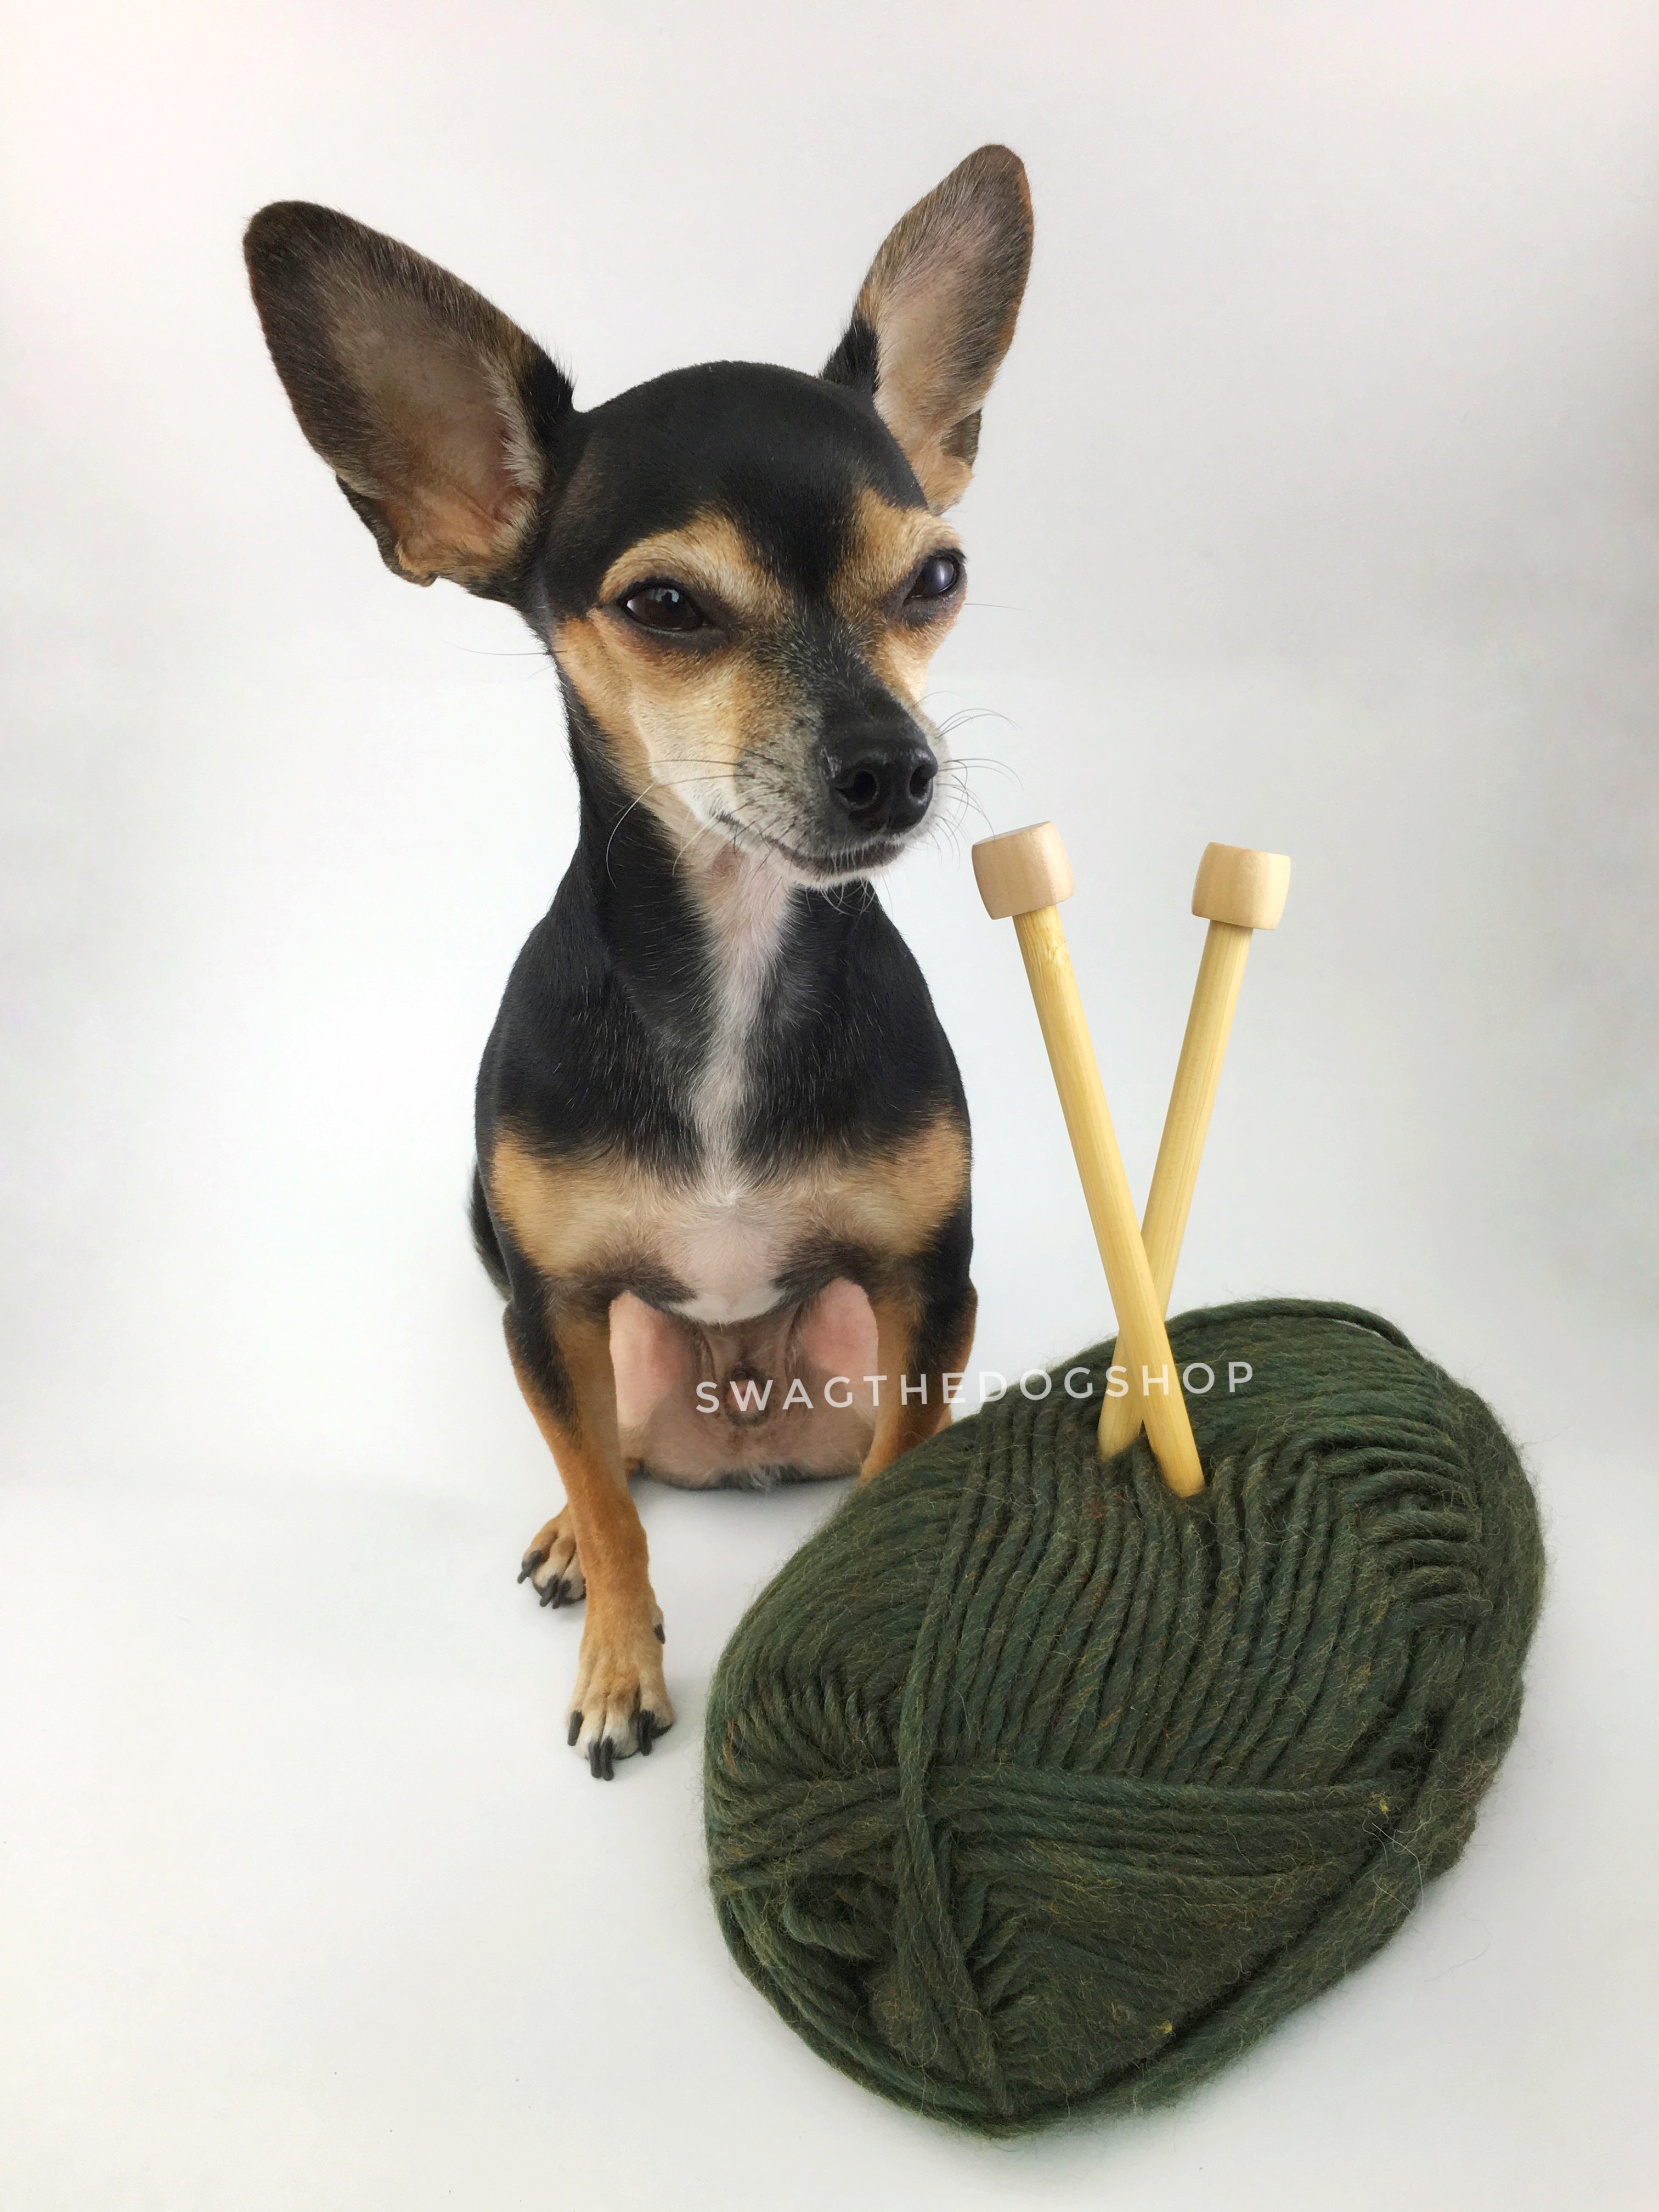 Army Green Swagsnood - Yarn View with Cute Chihuahua Dog. Army Green Color Dog Snood with Accent Button